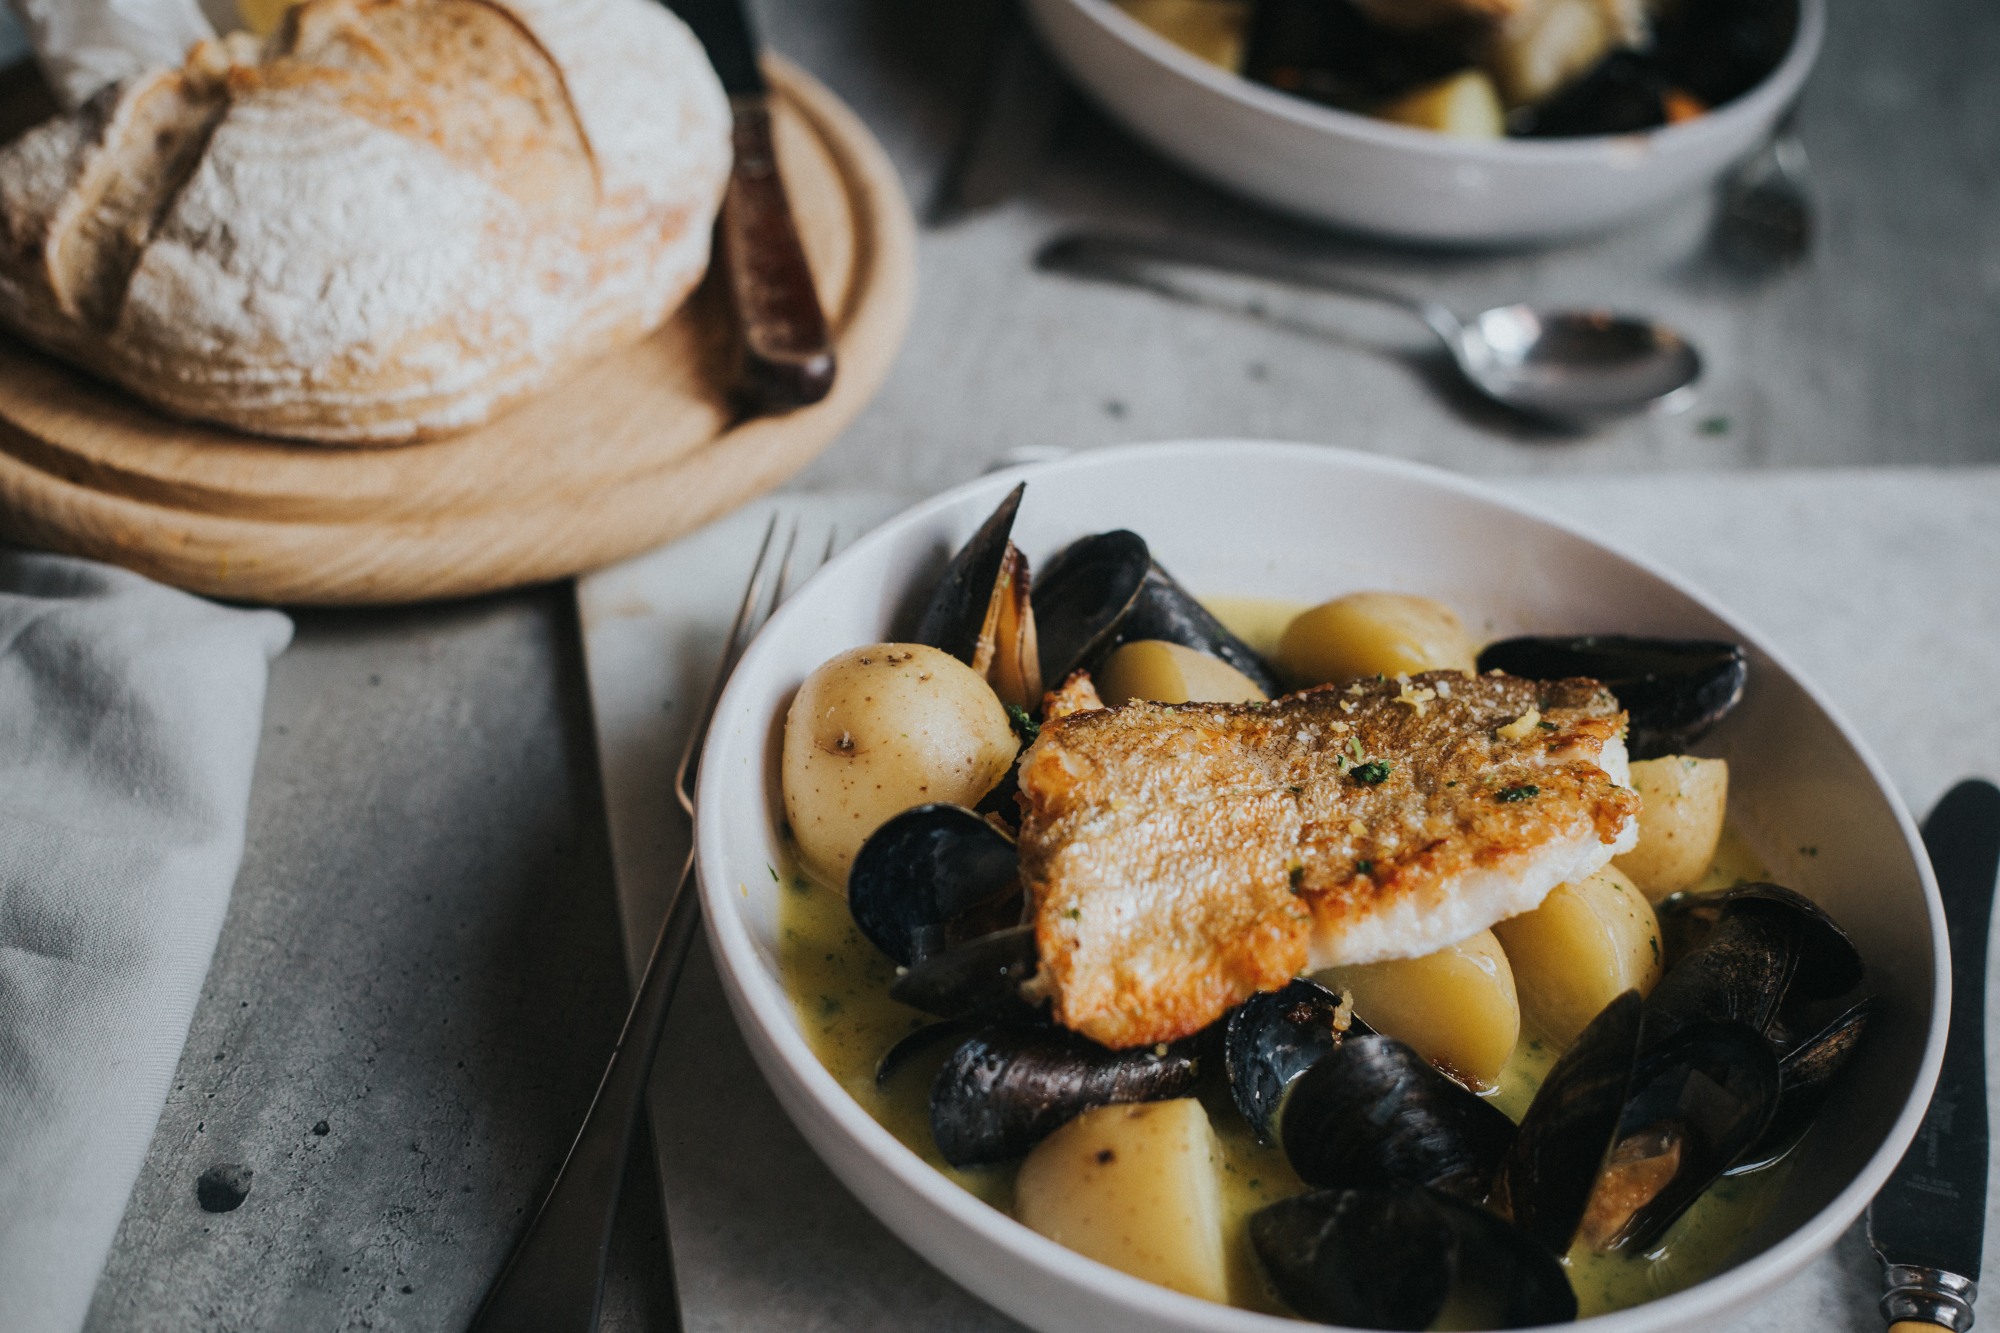 Pan-Fried White Fish with Mussels, Cider, Potatoes